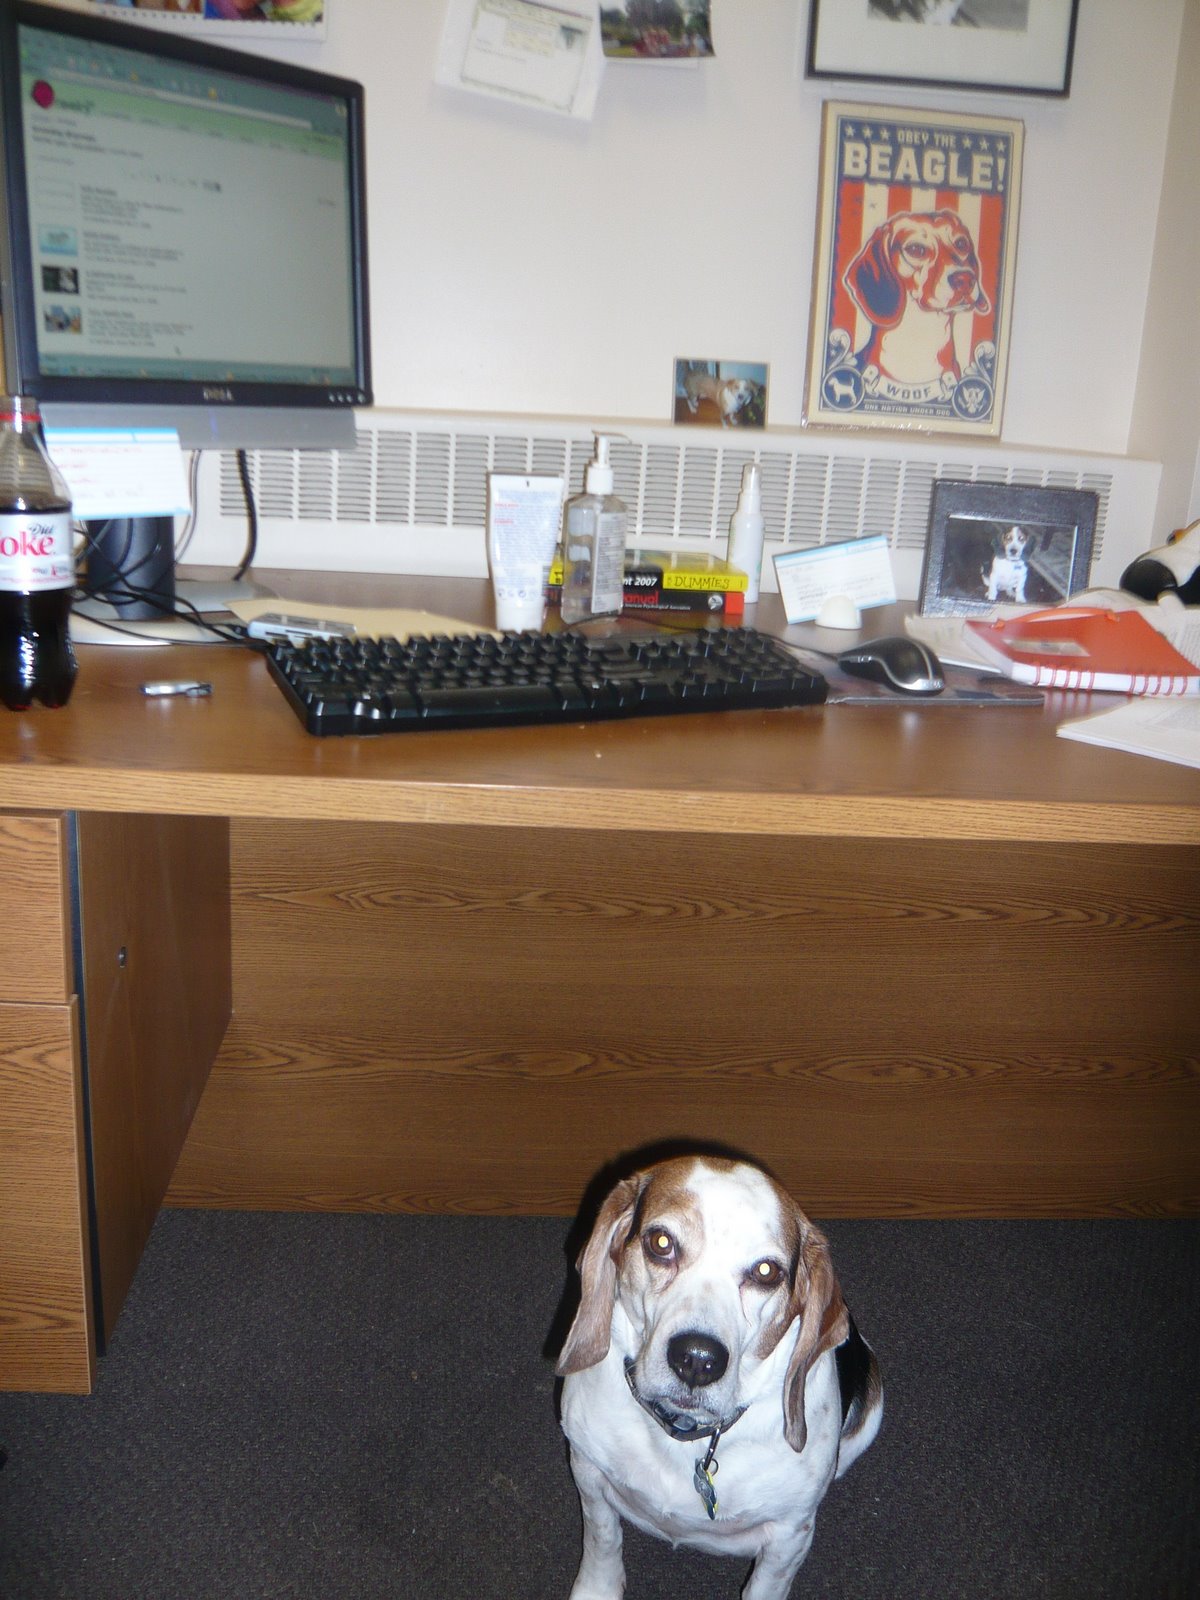 [gus+visits+the+office+finn+visits+the+dinig+room+table+001.jpg]